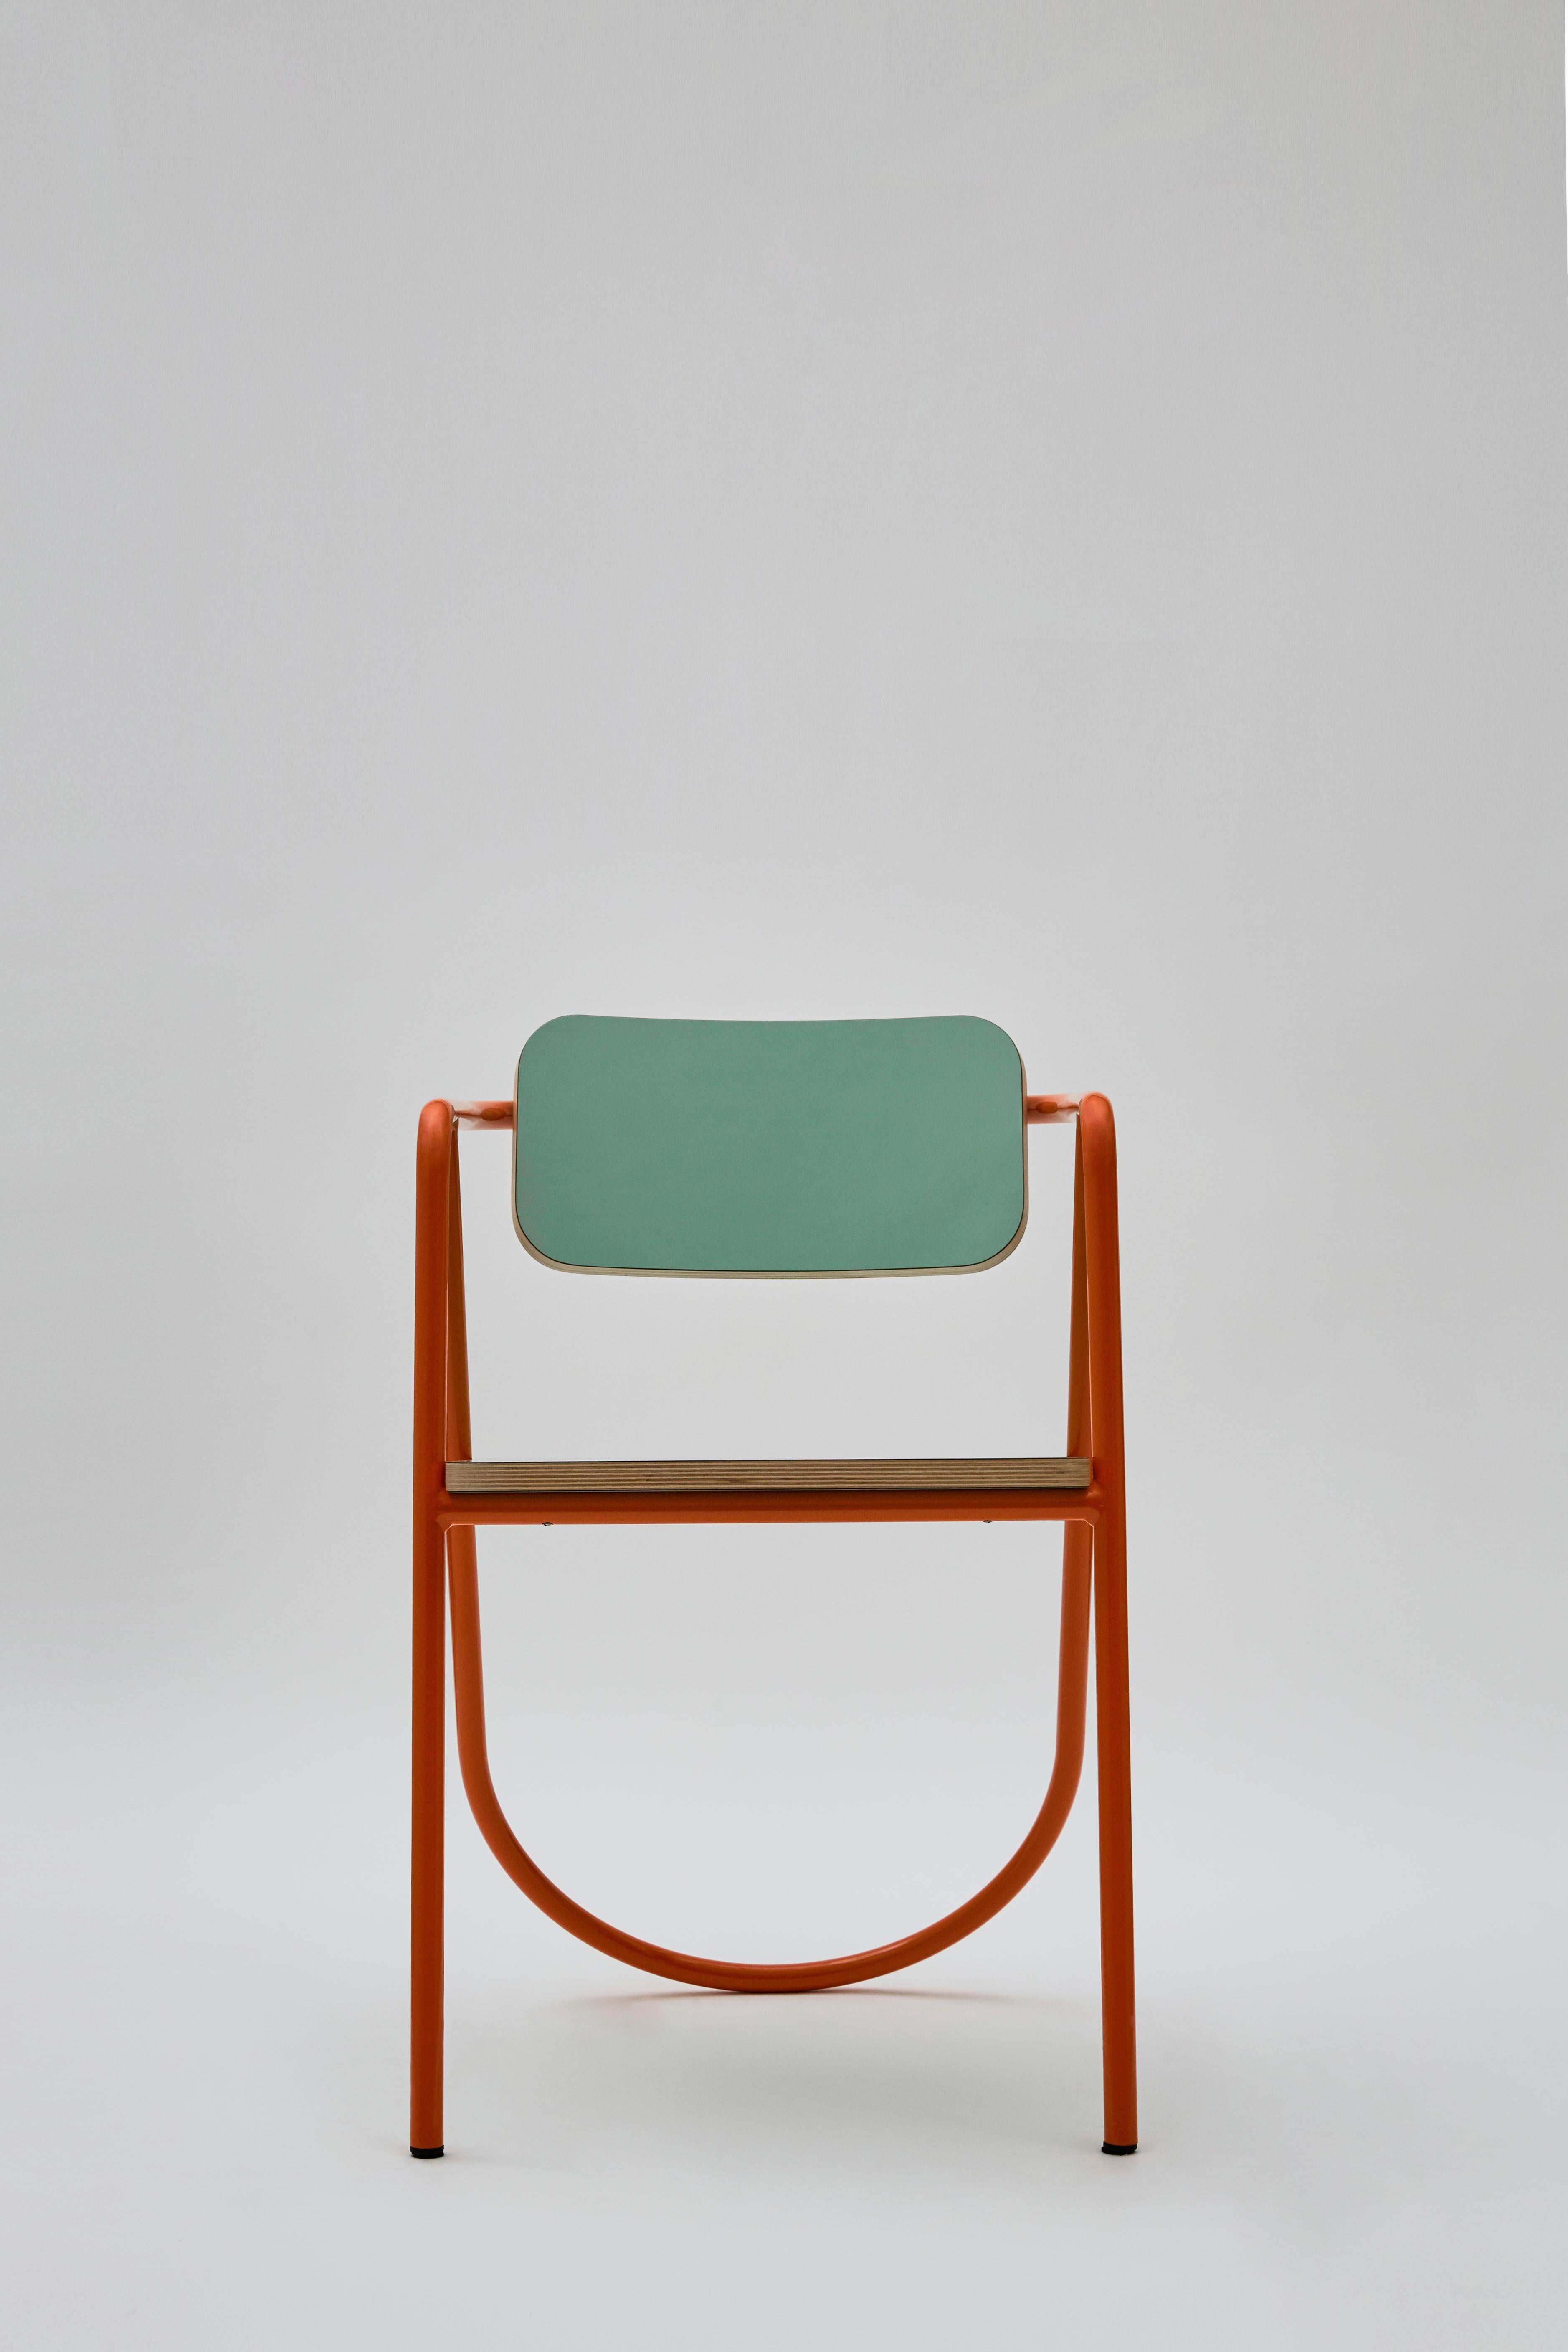 Airy and colorful, the design of this armchair makes it a superb addition to retro-inspired homes or contemporary decors one wants to accent with an eclectic twist. The teal-finished wooden backrest and seat are mounted on a cylindrical steel frame